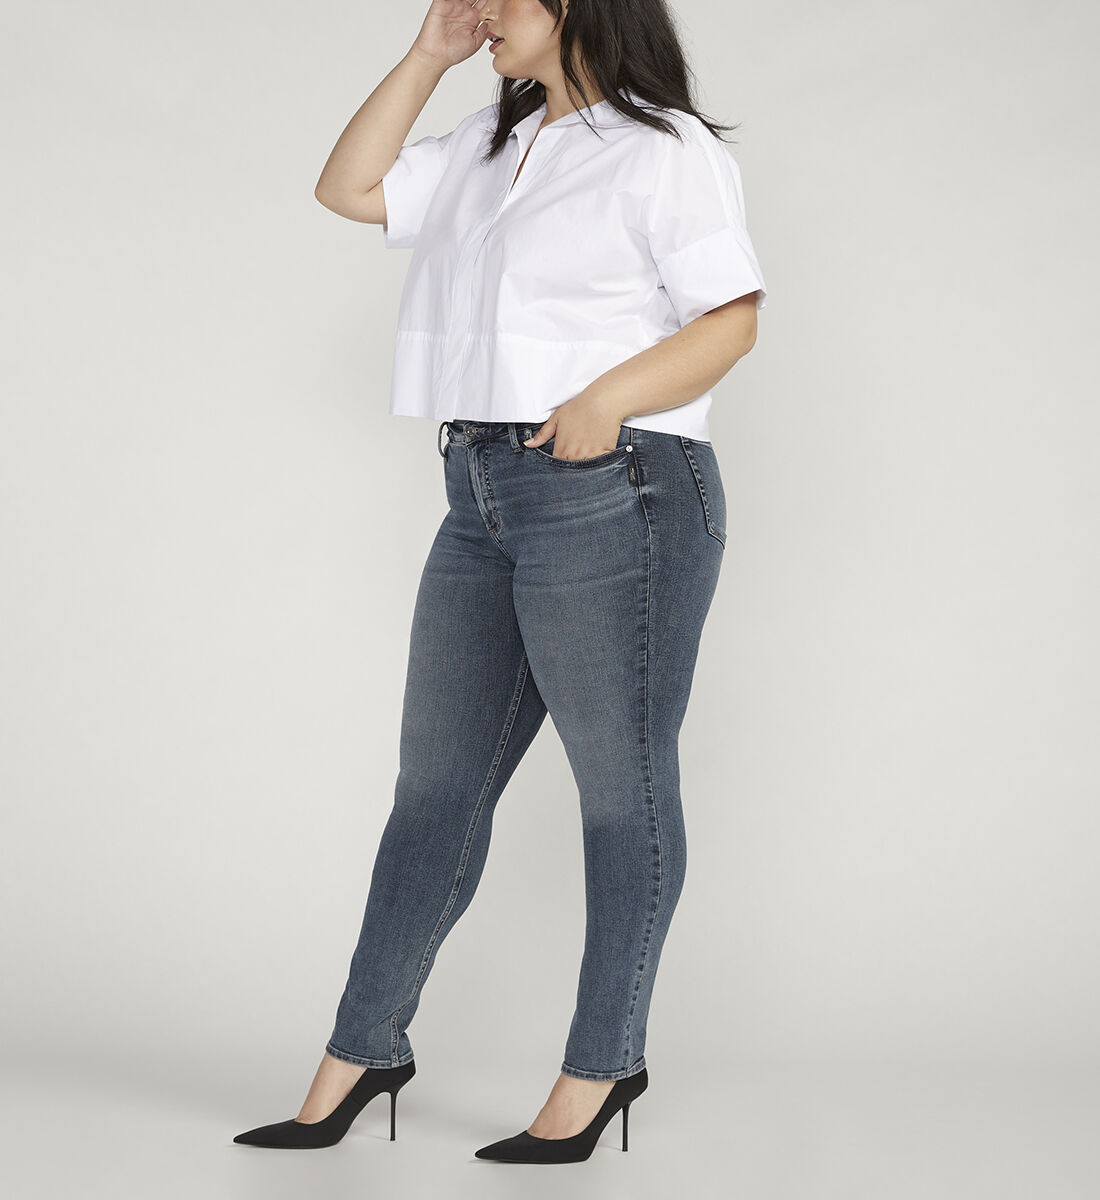 Buy Most Wanted Mid Rise Straight Leg Jeans Plus Size for USD 